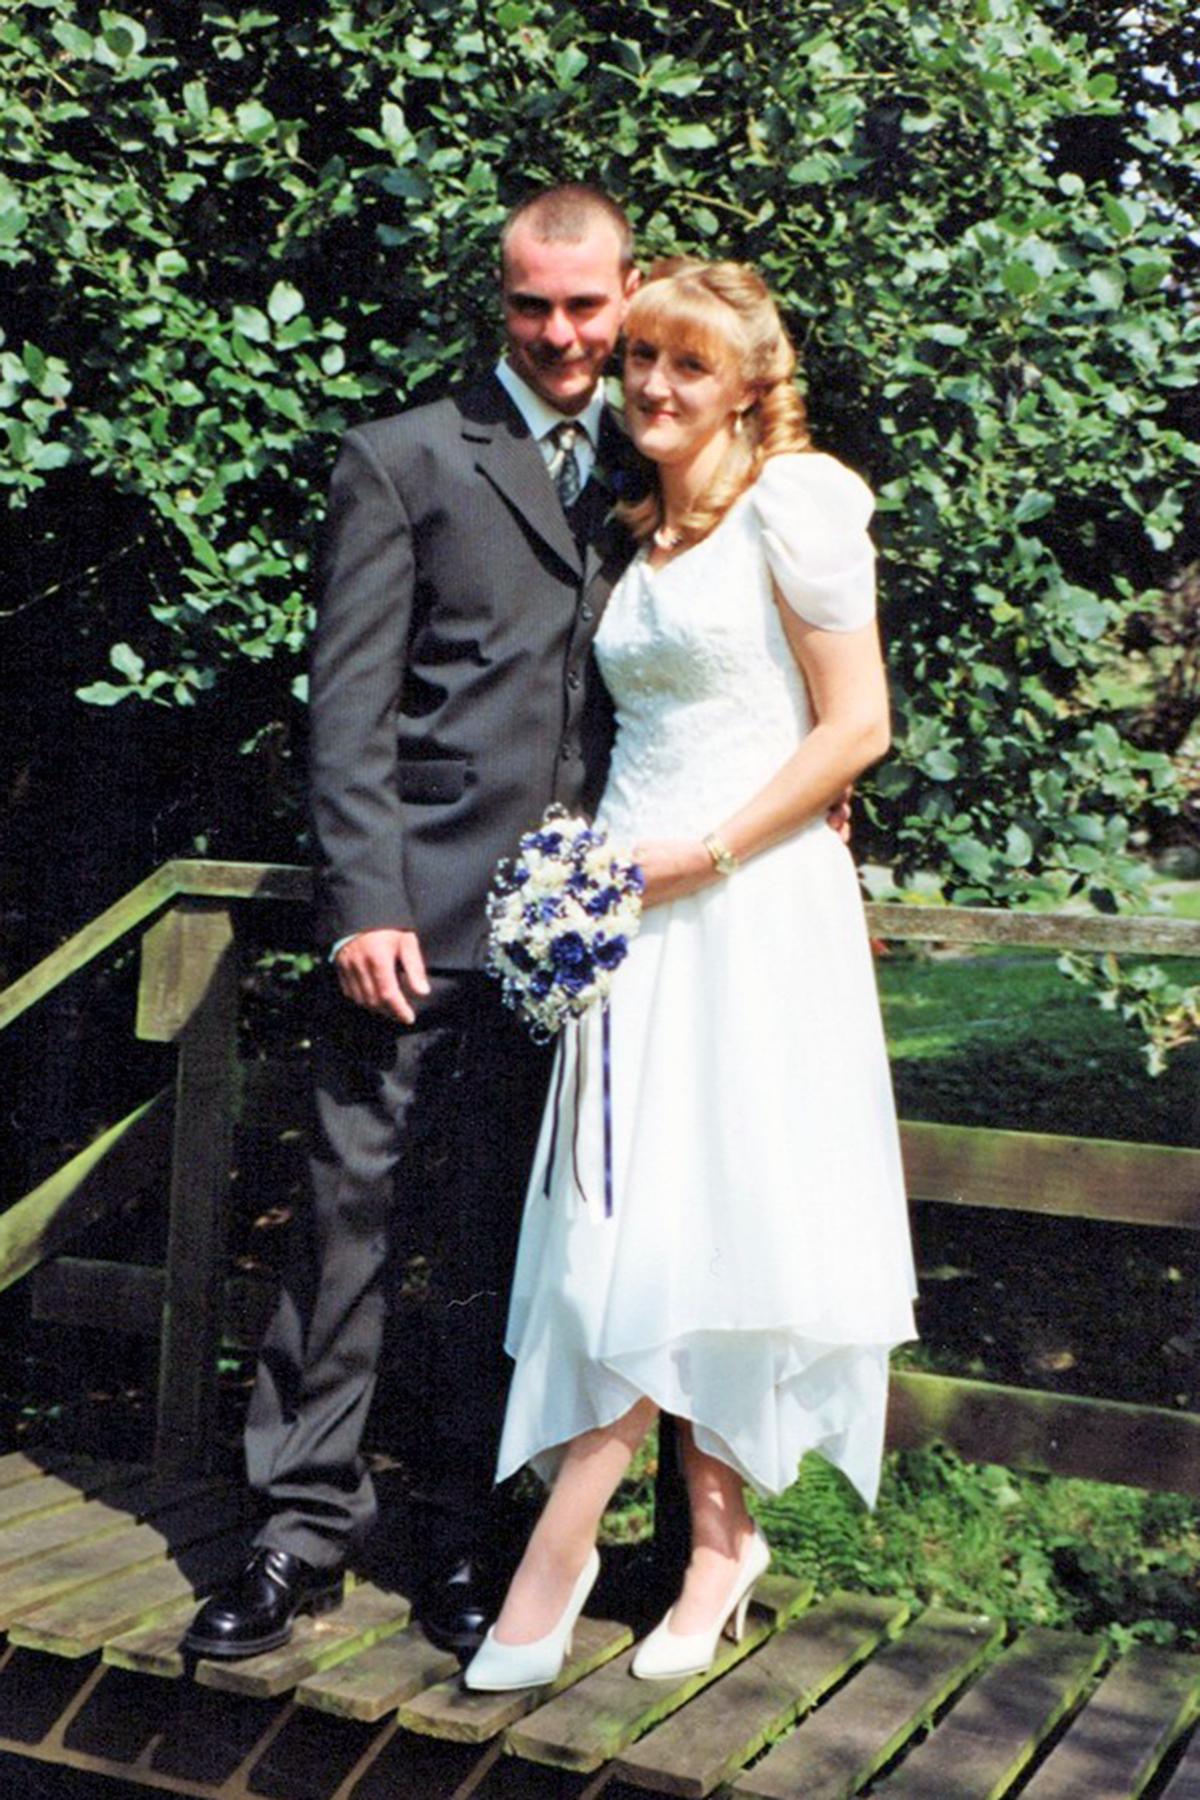 David and Dawn at their wedding in 1998. (Caters News)